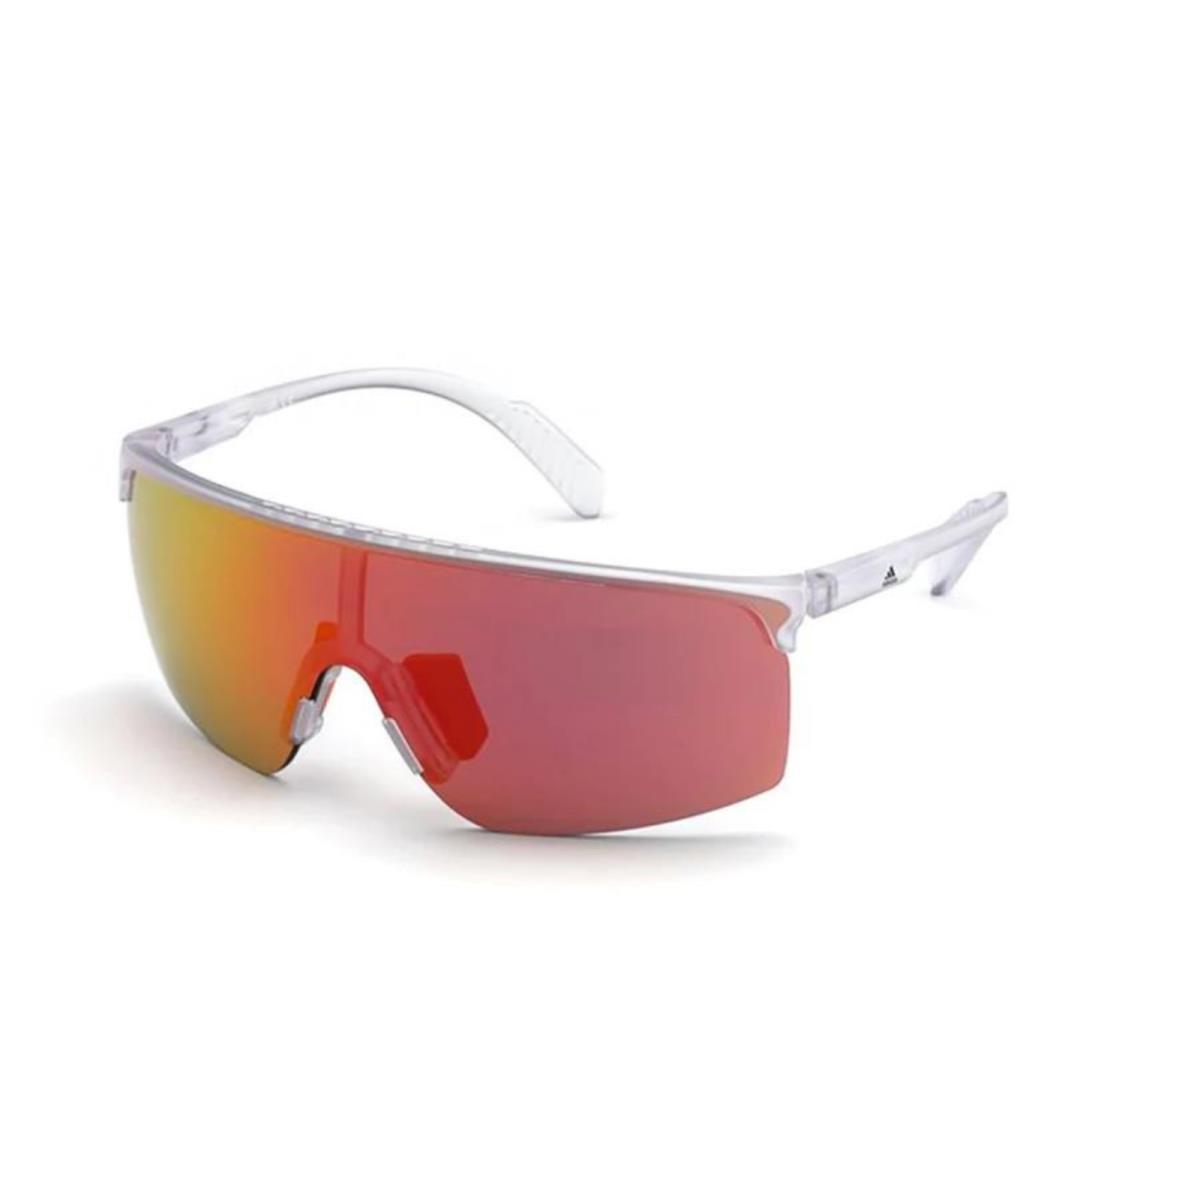 Adidas Sunglasses EV1134 010 65 Semi Rimless with Crystal Color For Men